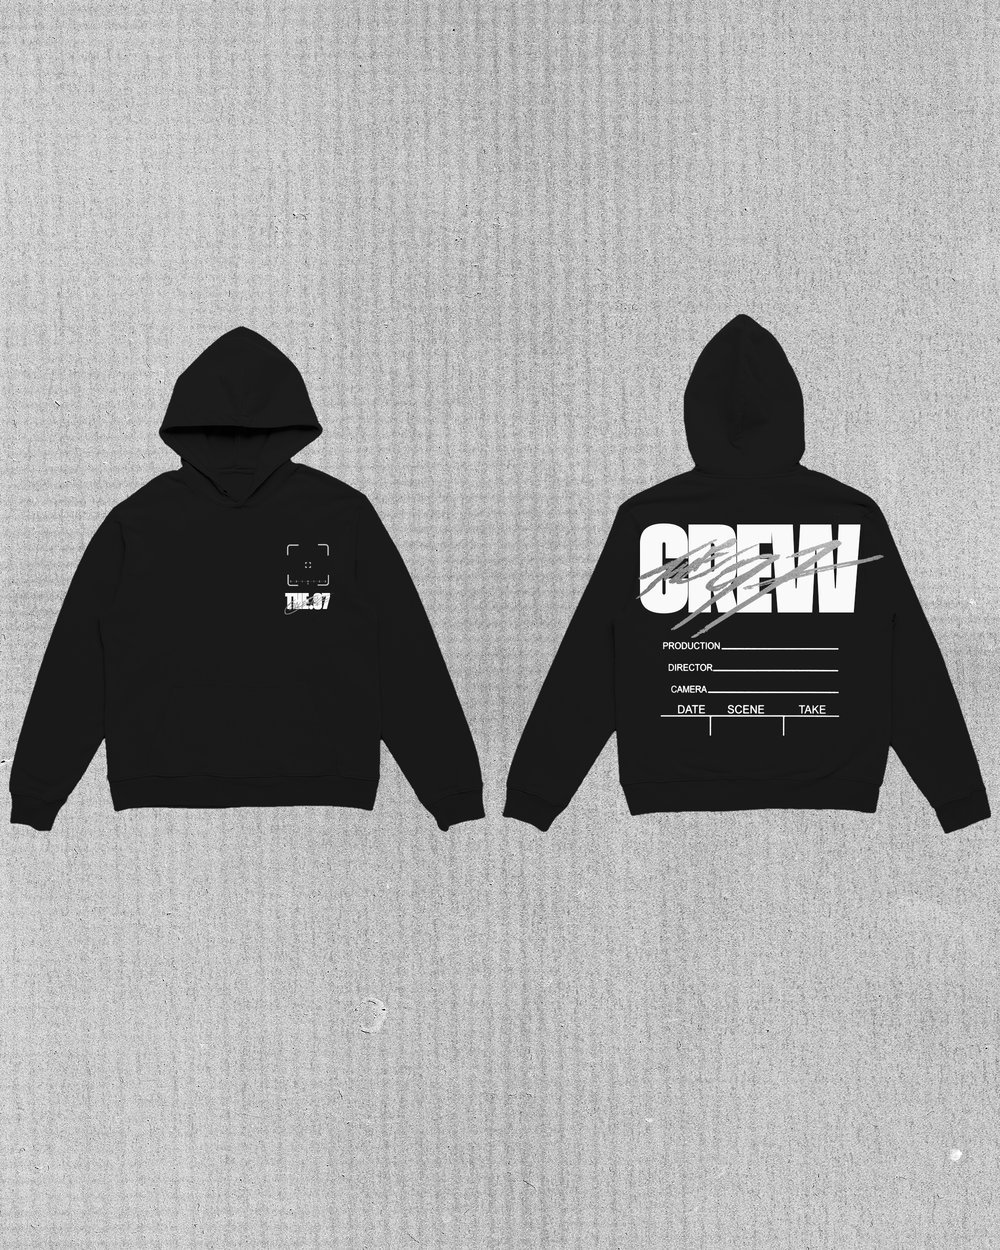 Image of The.97 Collective 002 "CREW" Hoodie